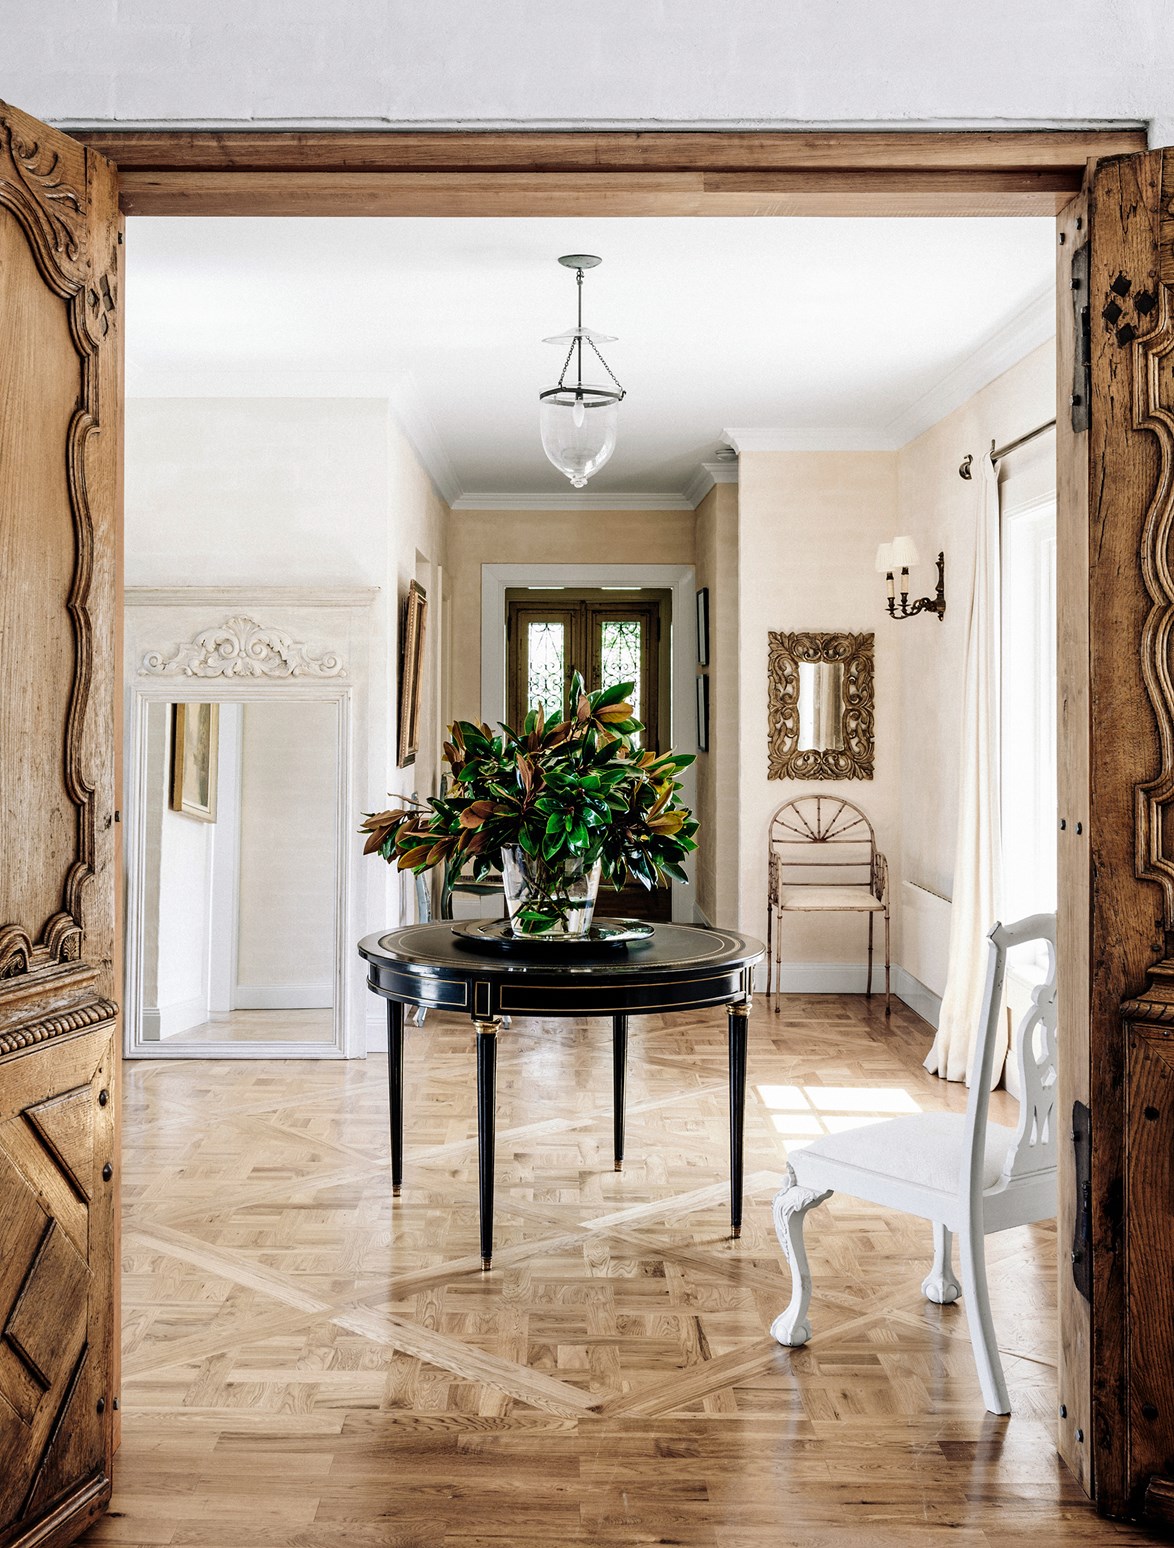 Parquetry flooring is a common design element of French provincial style.